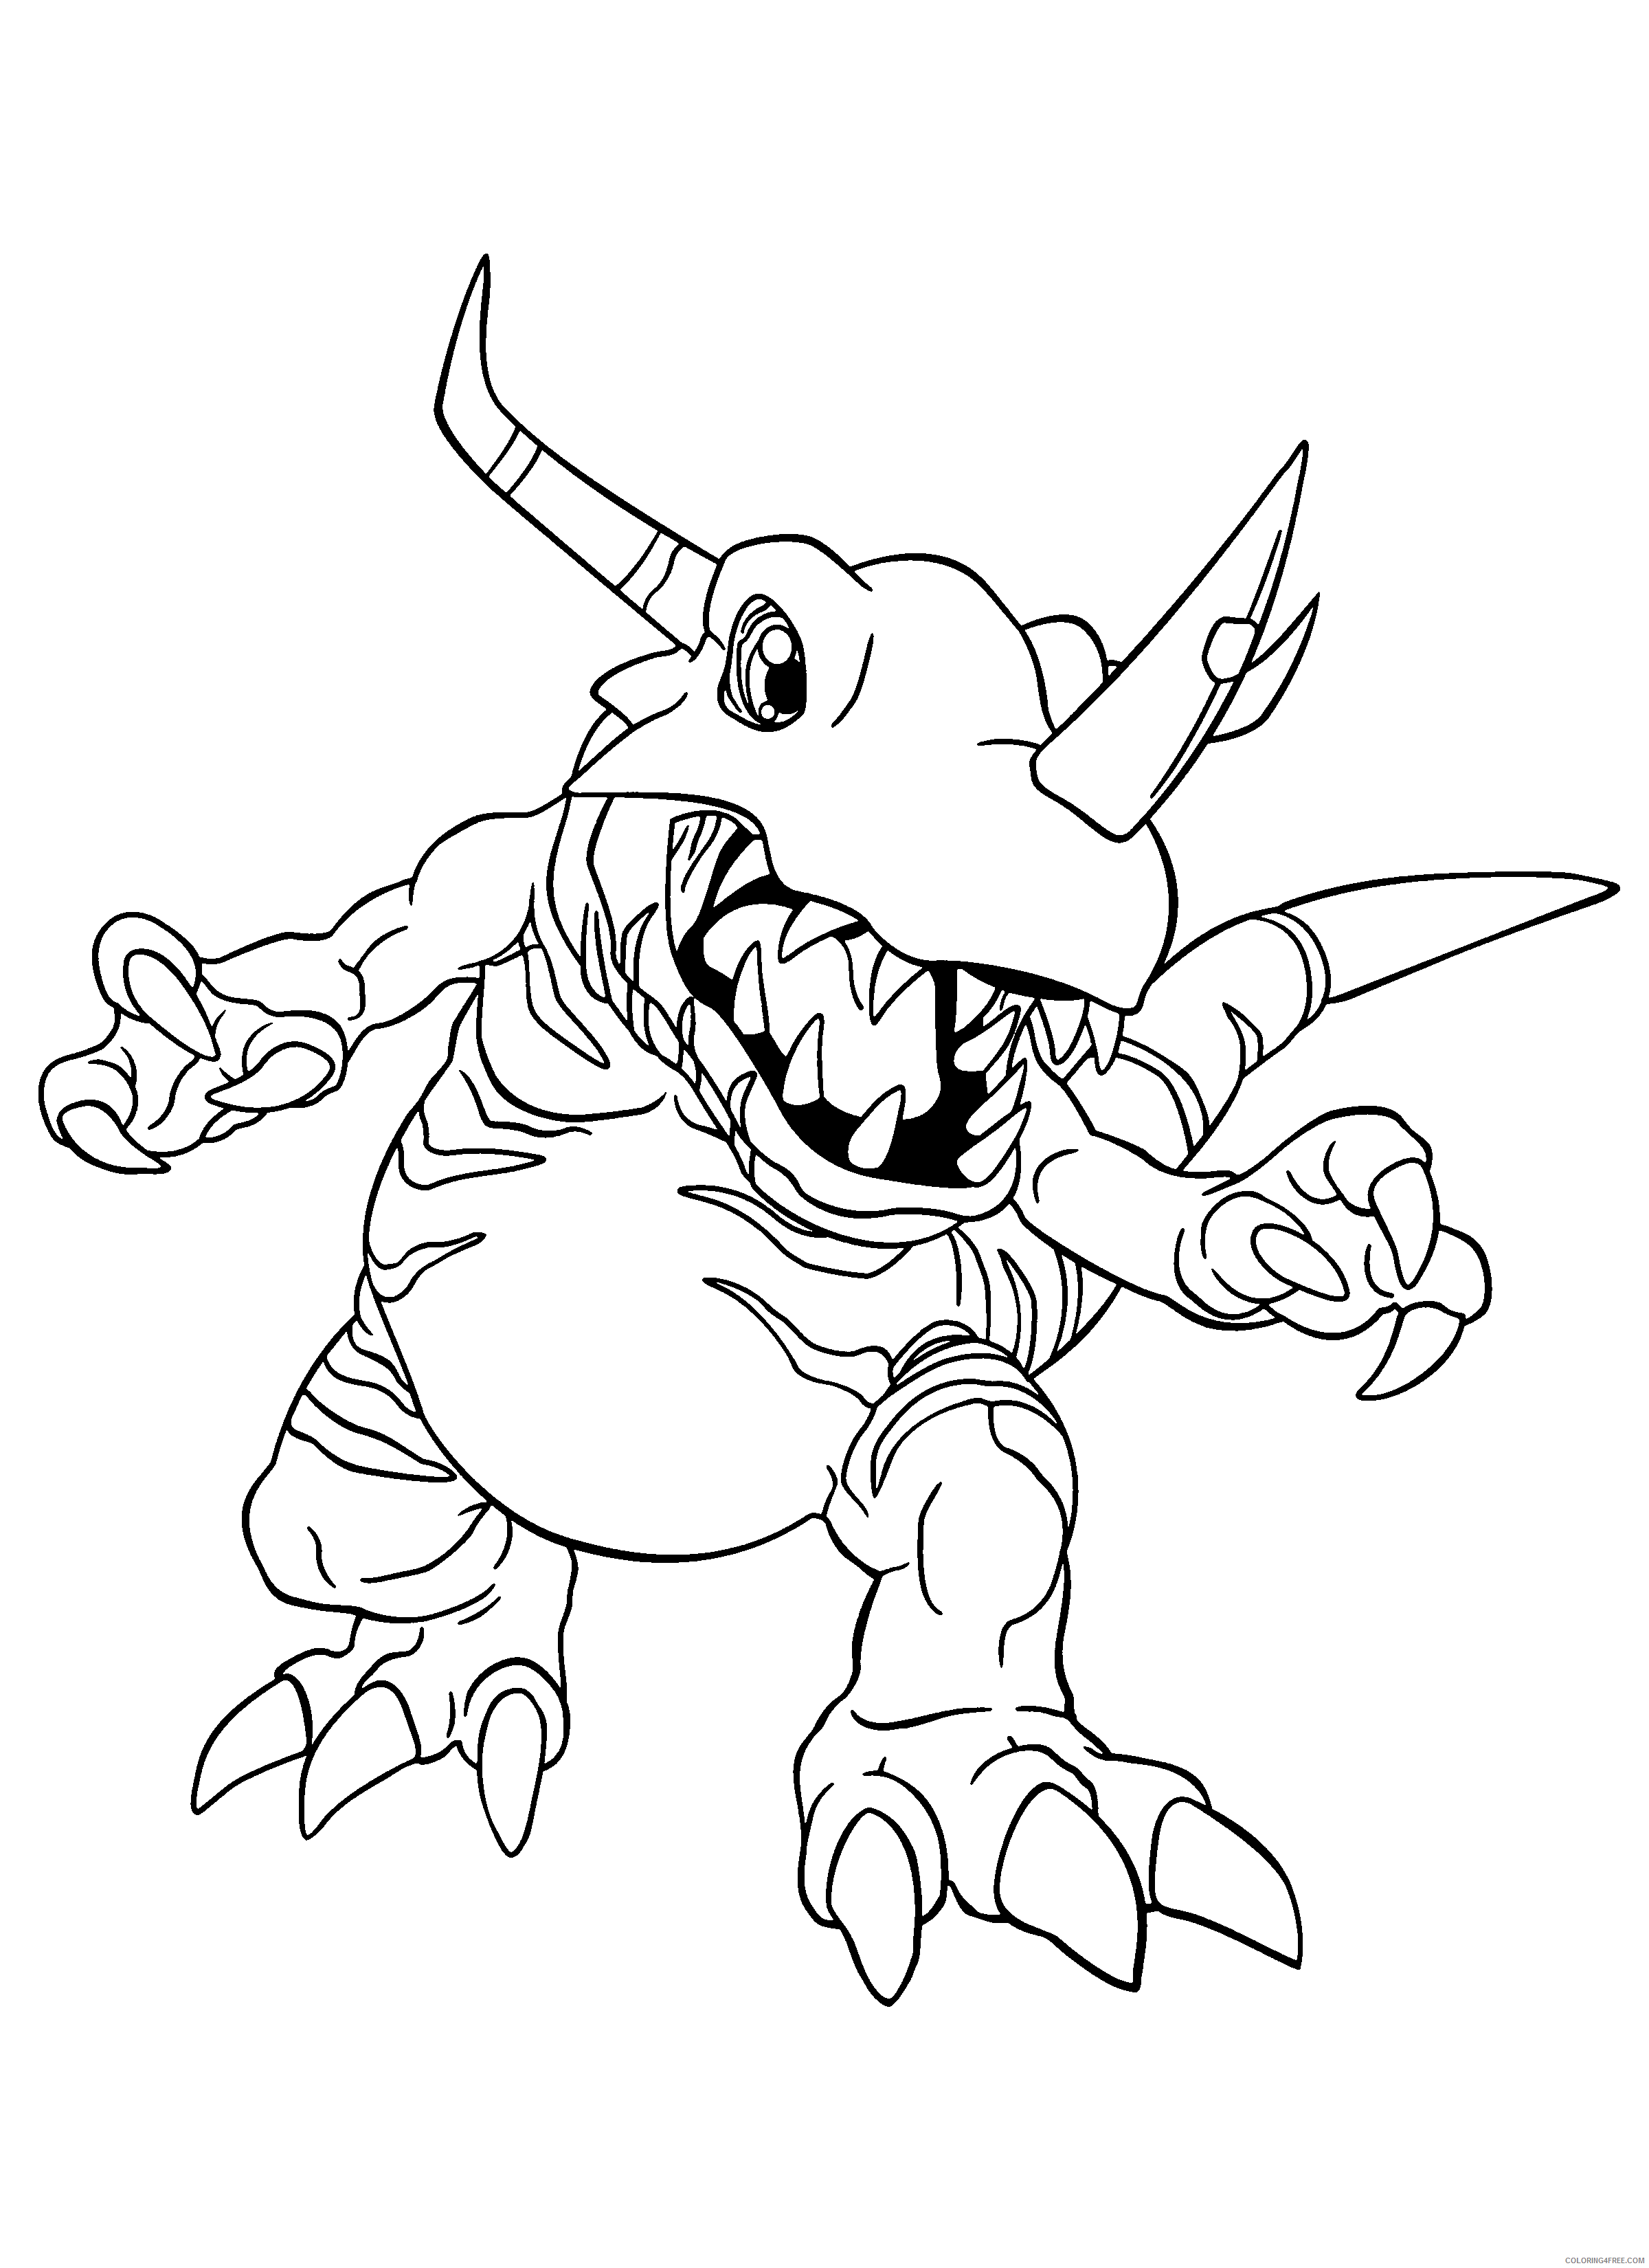 Digimon Printable Coloring Pages Anime digimon 149 2021 0240 Coloring4free